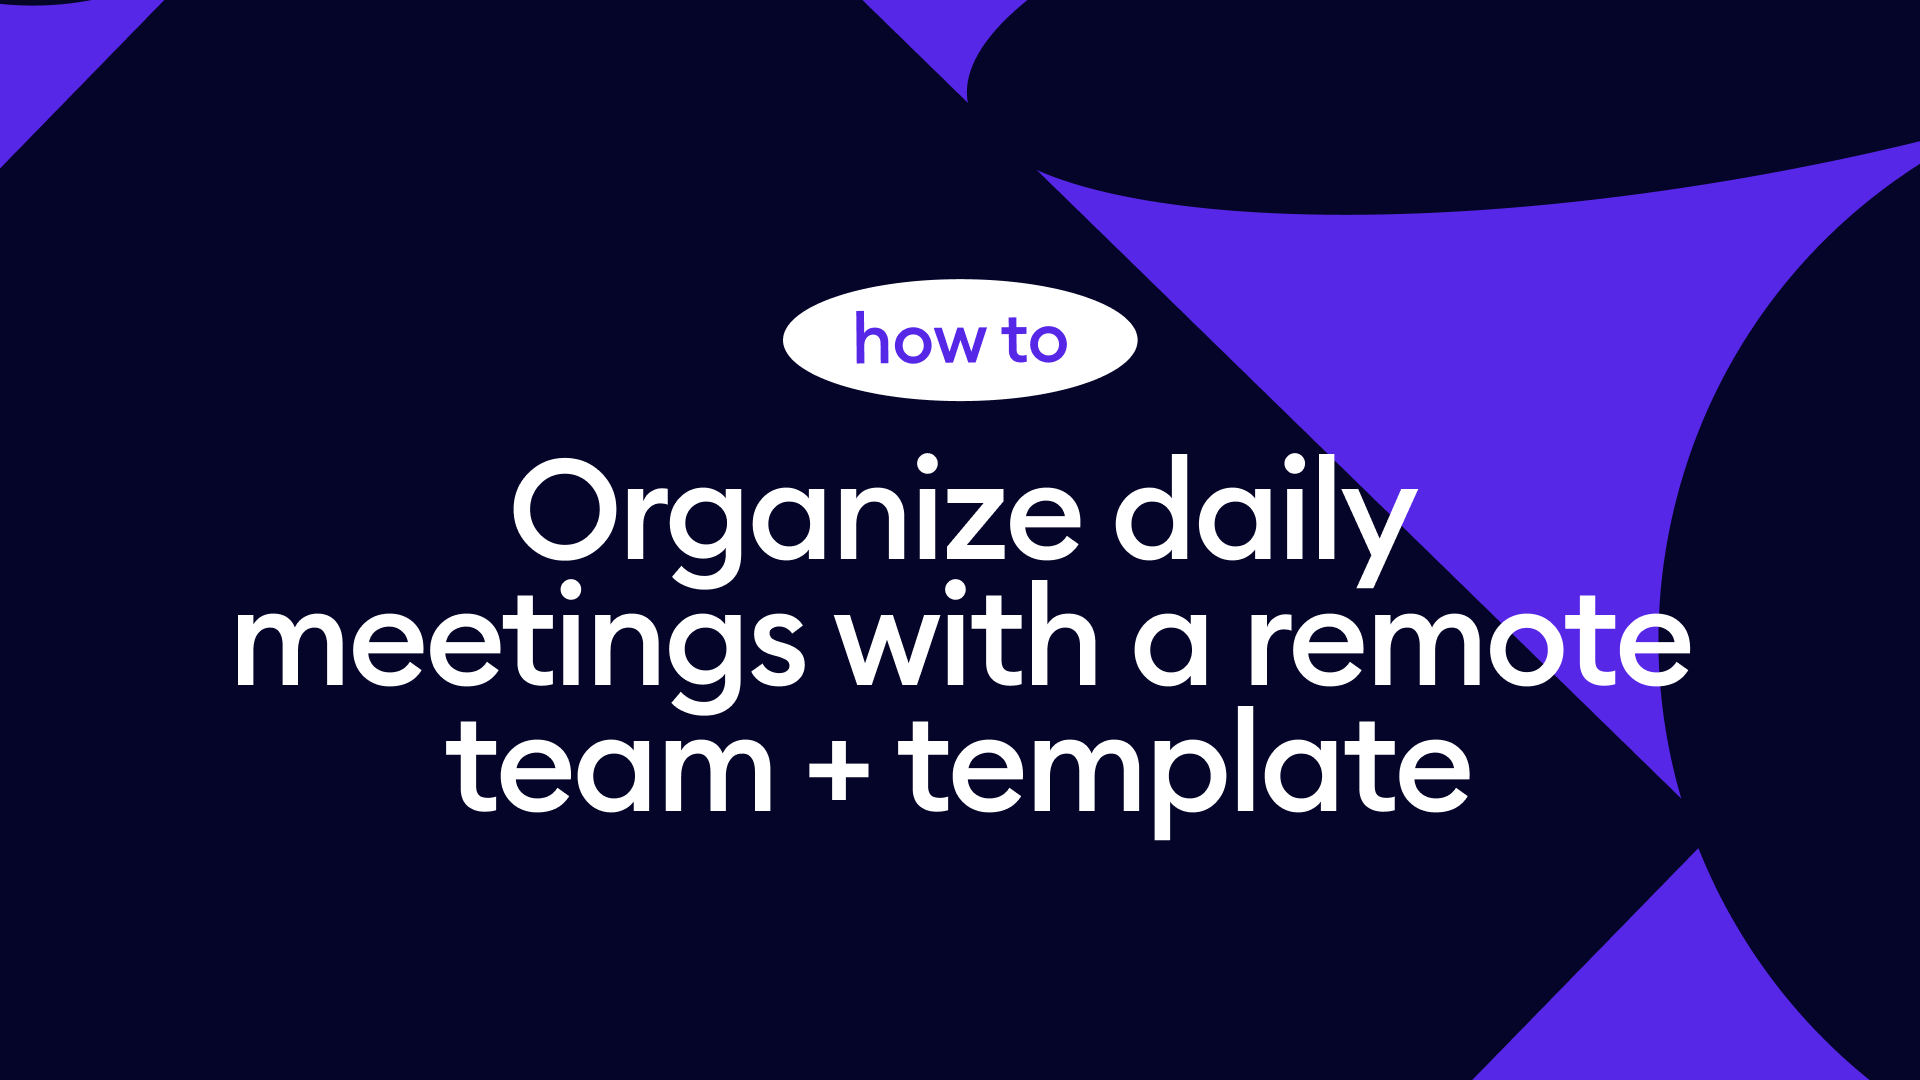 How to organize daily meetings with a remote team + template